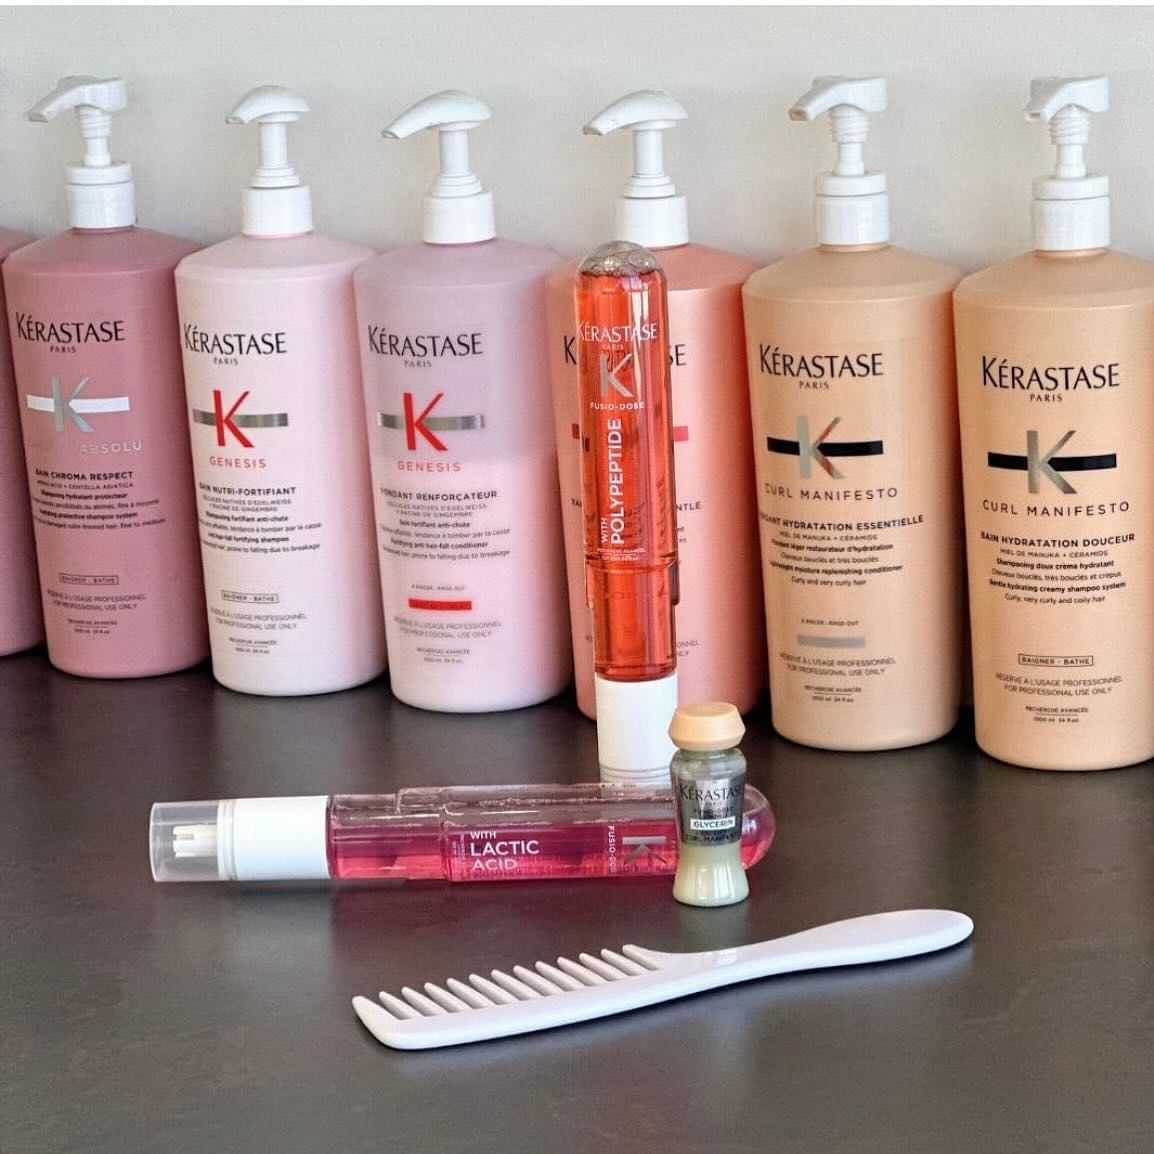 Row of Kérastase hair care products with a brush in front.